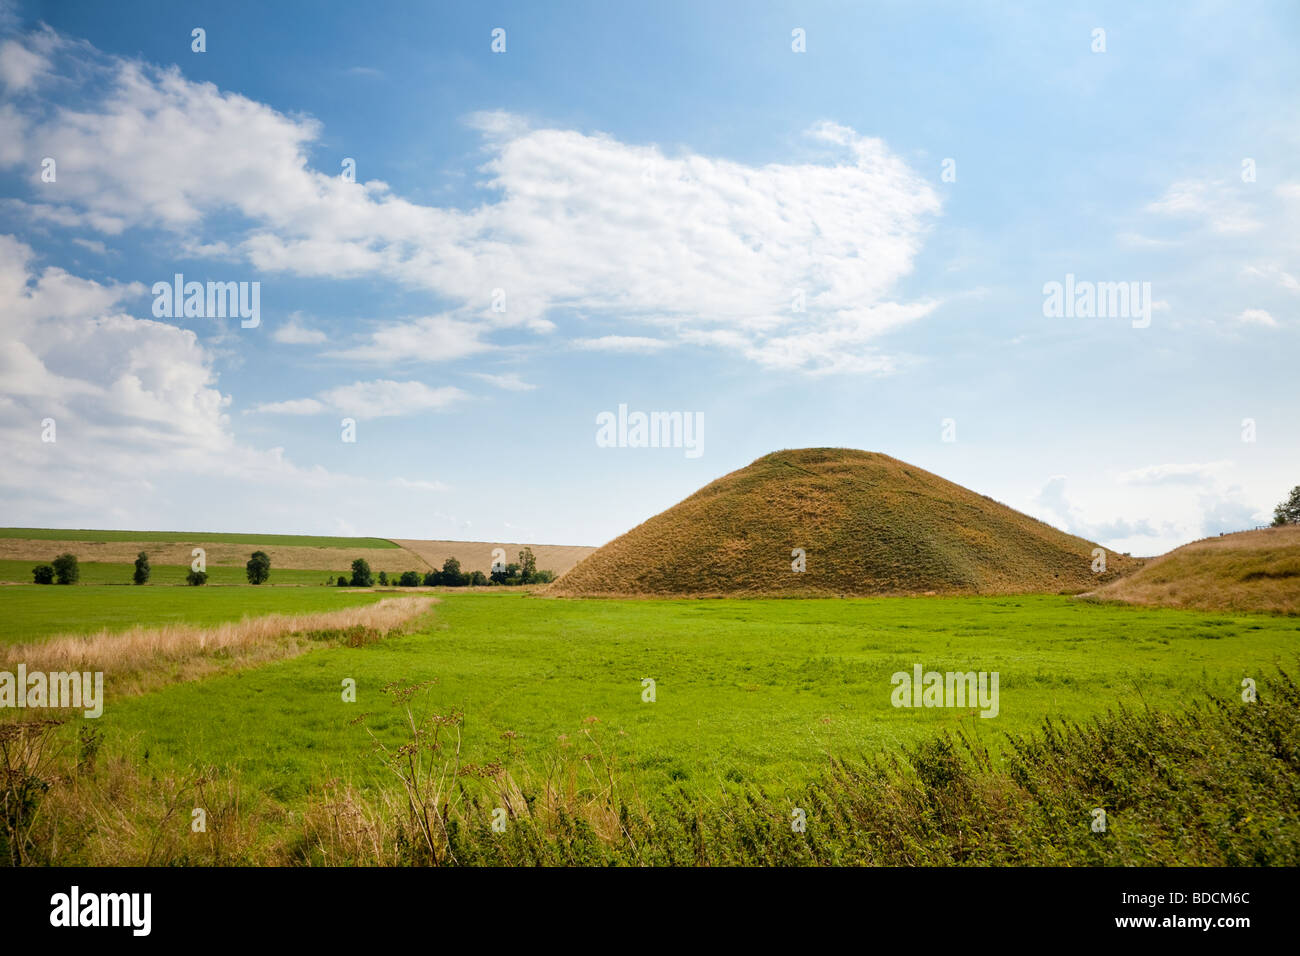 View of the neolithic monument of Silbury Hill and surrounding countryside in Wiltshire, England, UK Stock Photo